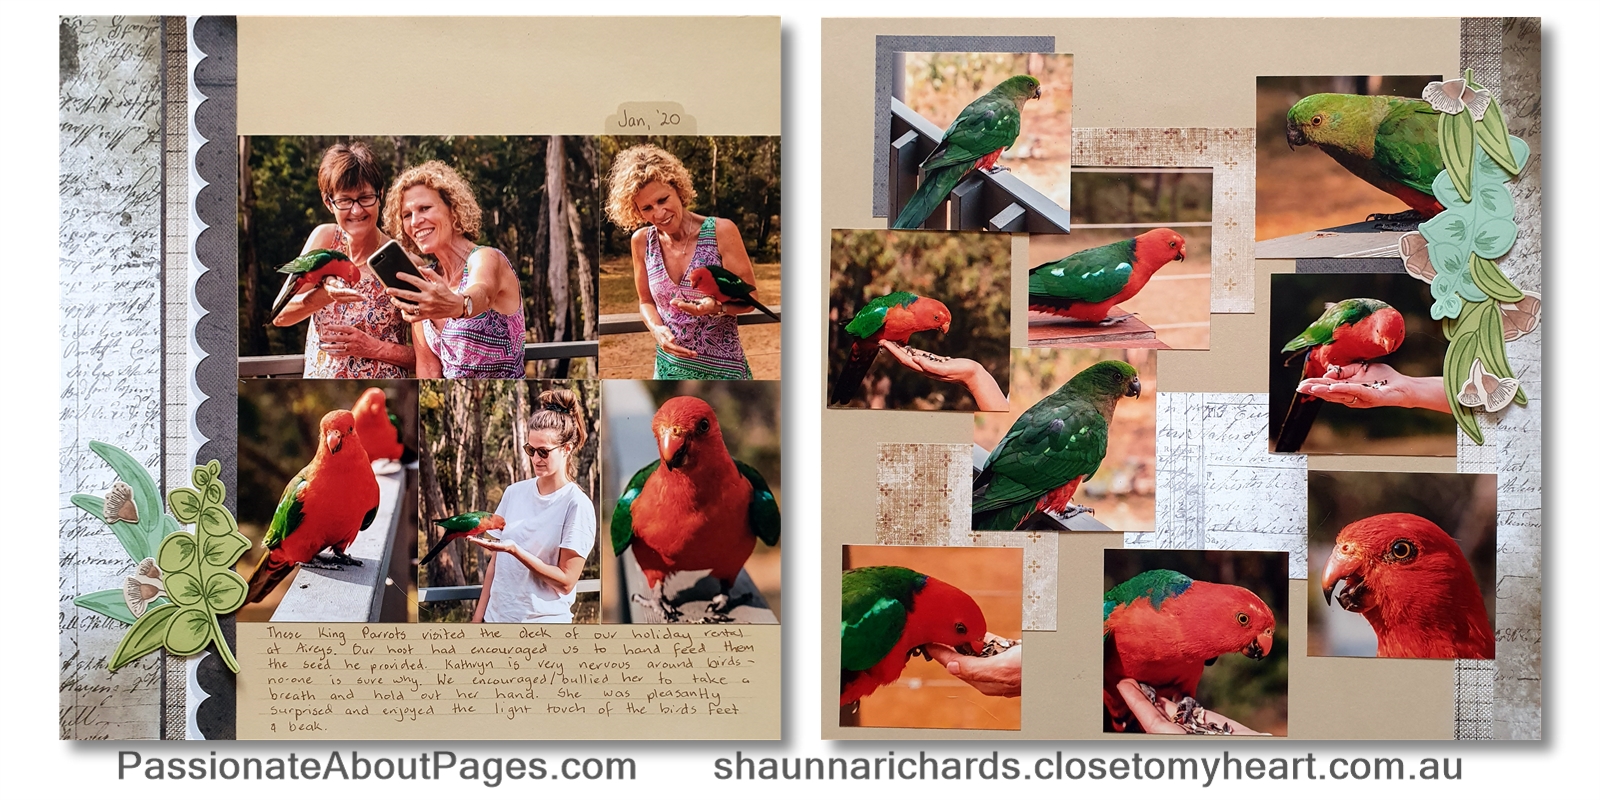 Close To My Heart’s Yesterday & Today collection adapts brilliantly to a variety of scrapbook themes and card designs. Order your collection at www.shaunnarichards.closetomyheart.com.au before the end of April 2020